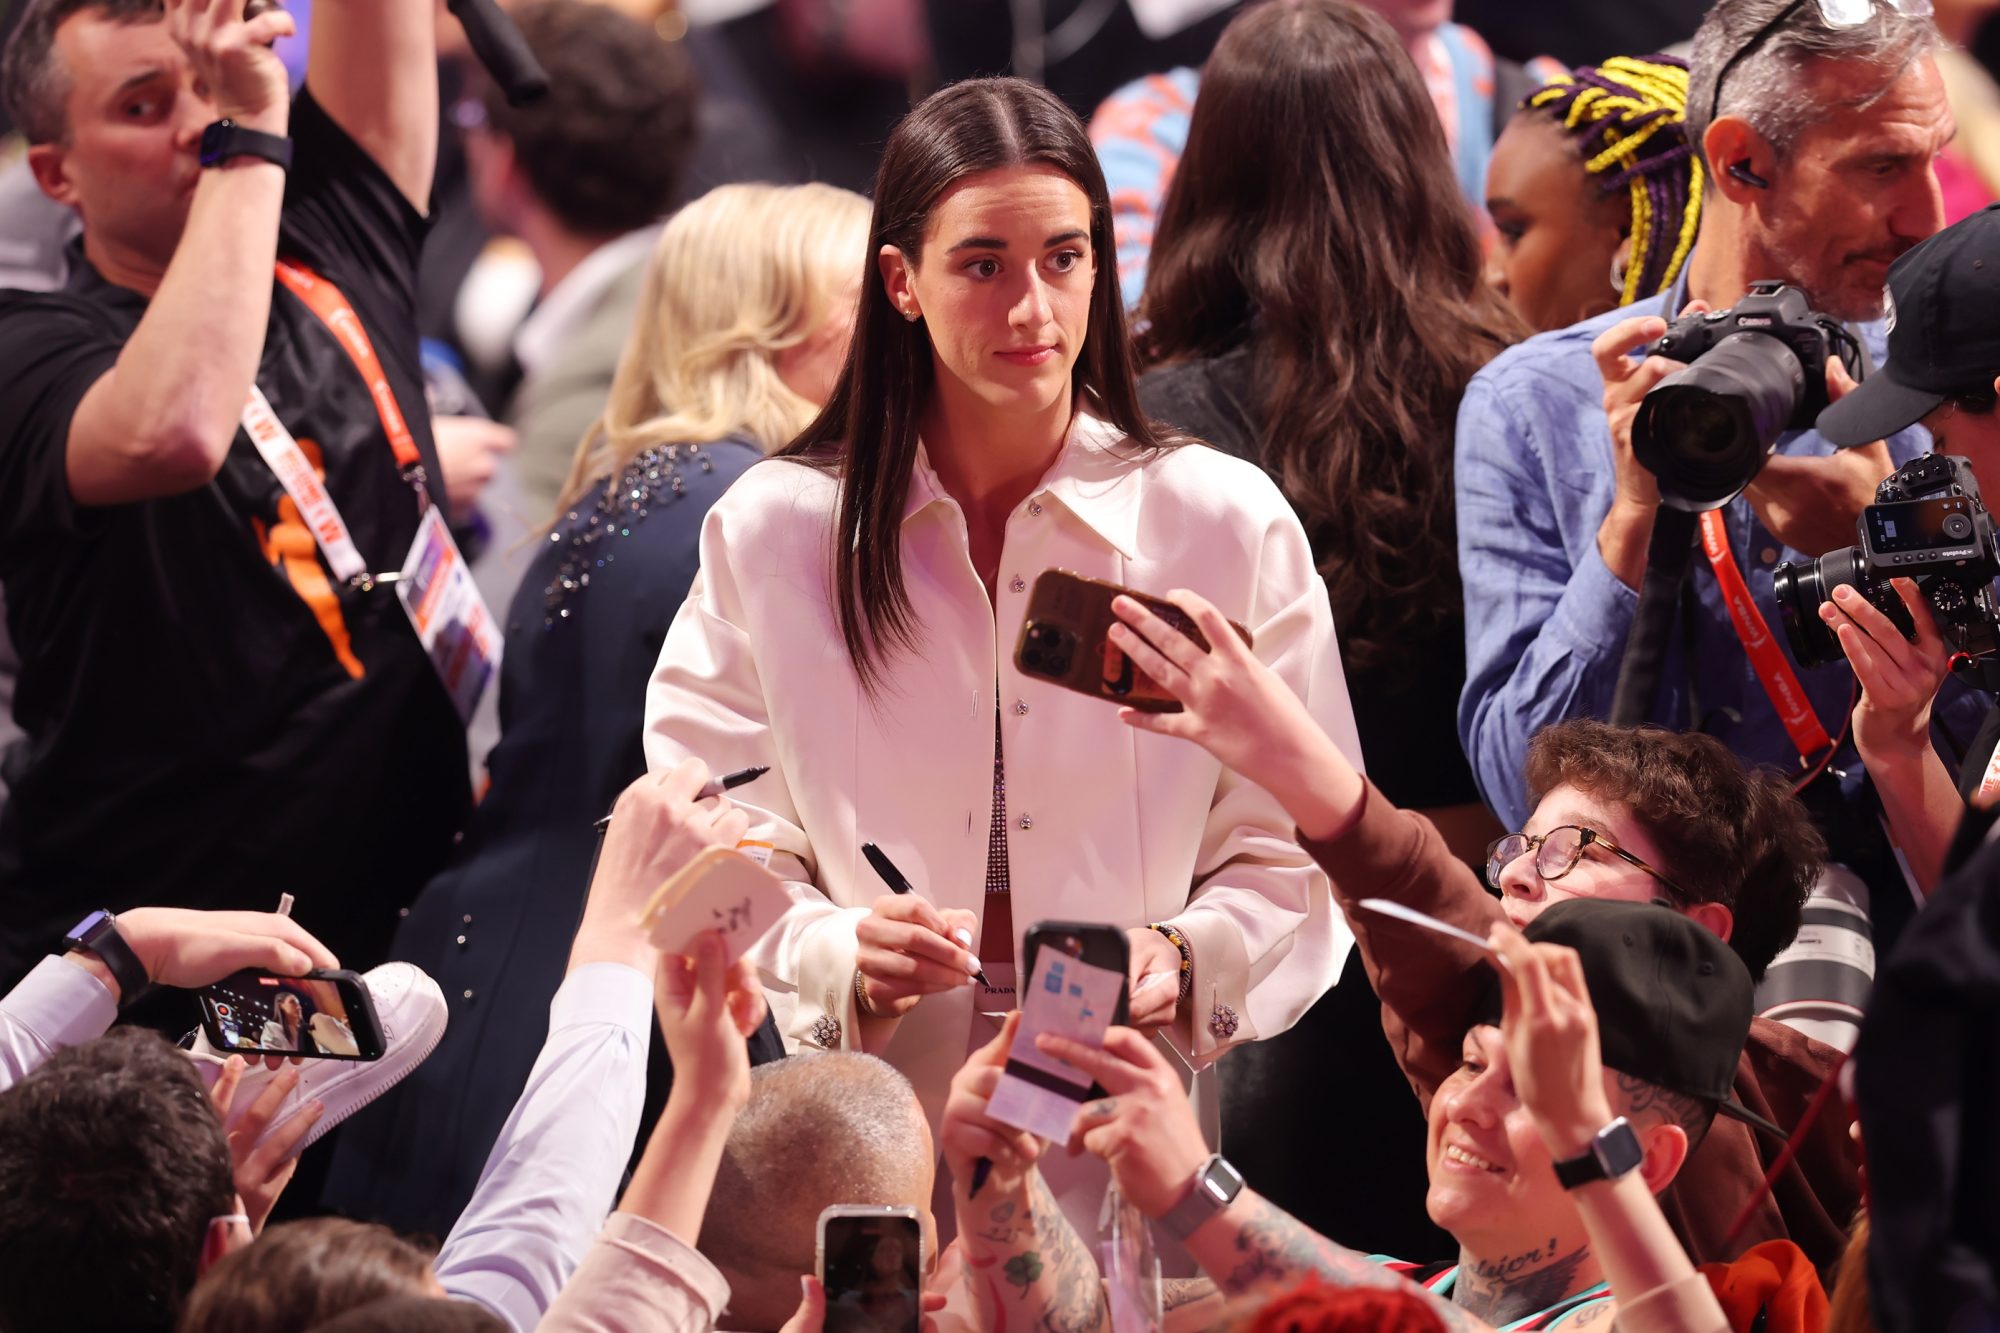 WNBA’s Strategic Moves with No. 1 Draft Pick Caitlin Clark & Expansion Plans